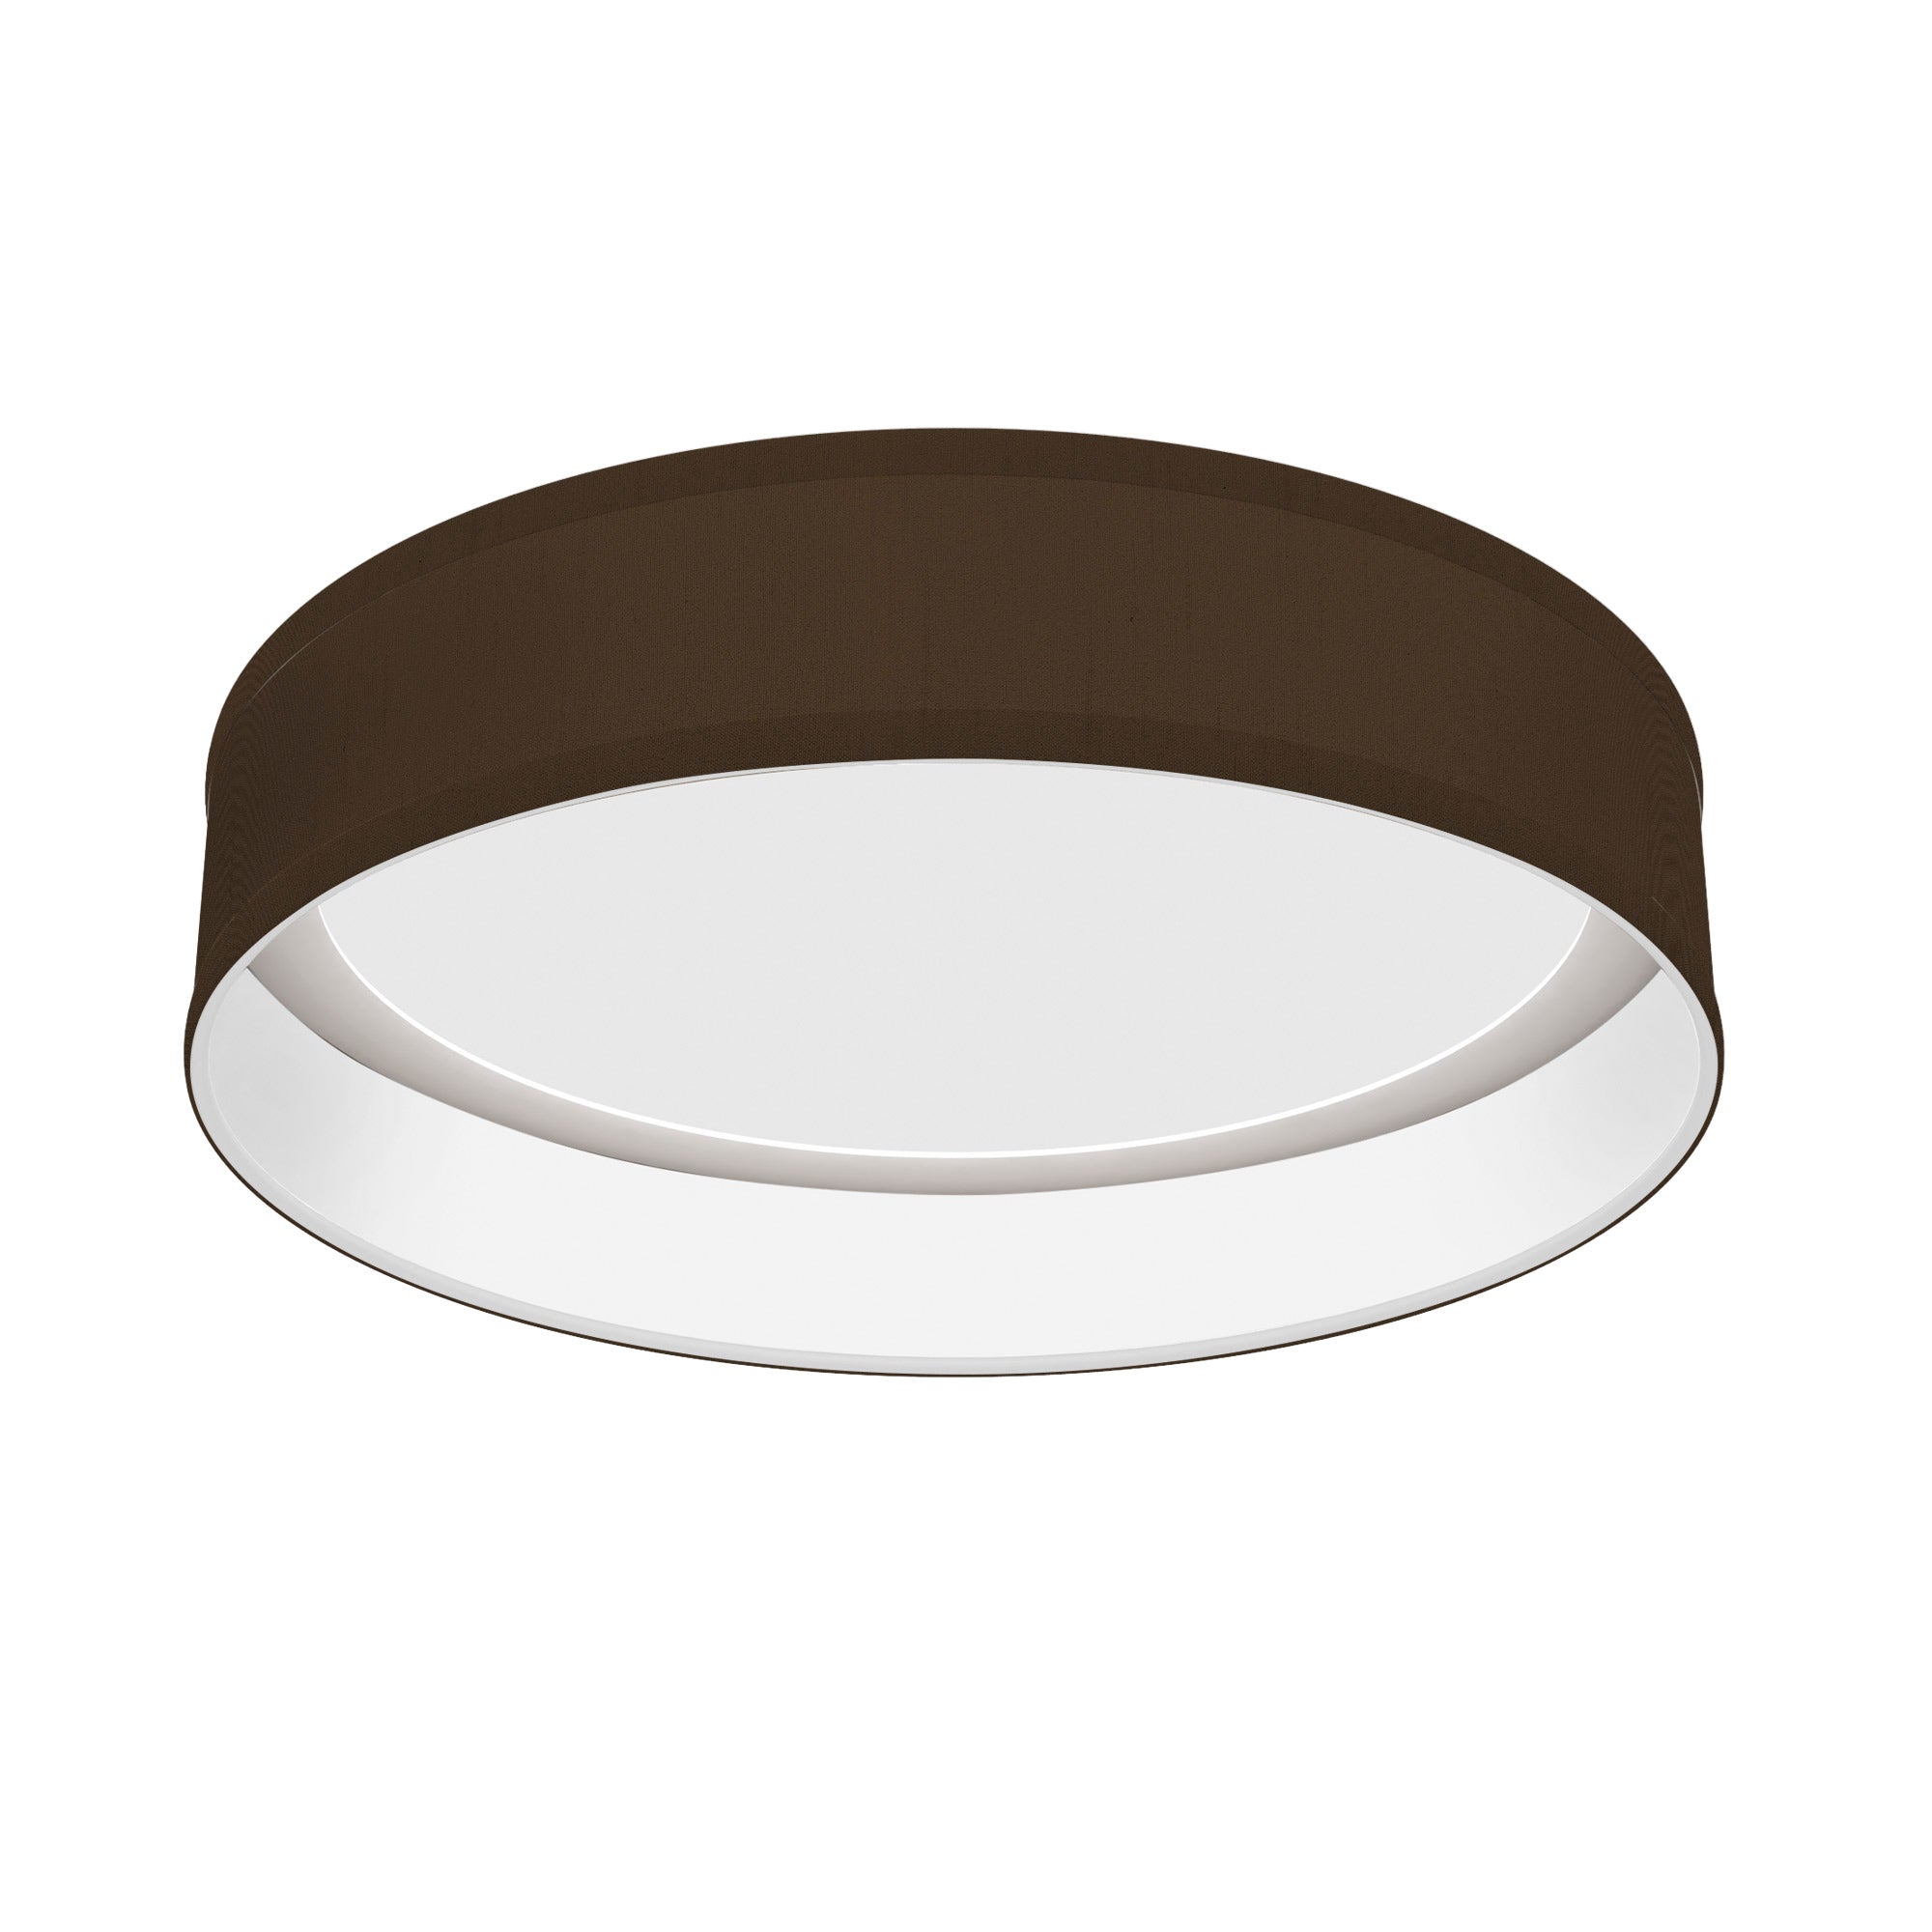 The Vince Flush Mount from Seascape Fixtures with a silk shade in chocolate color.